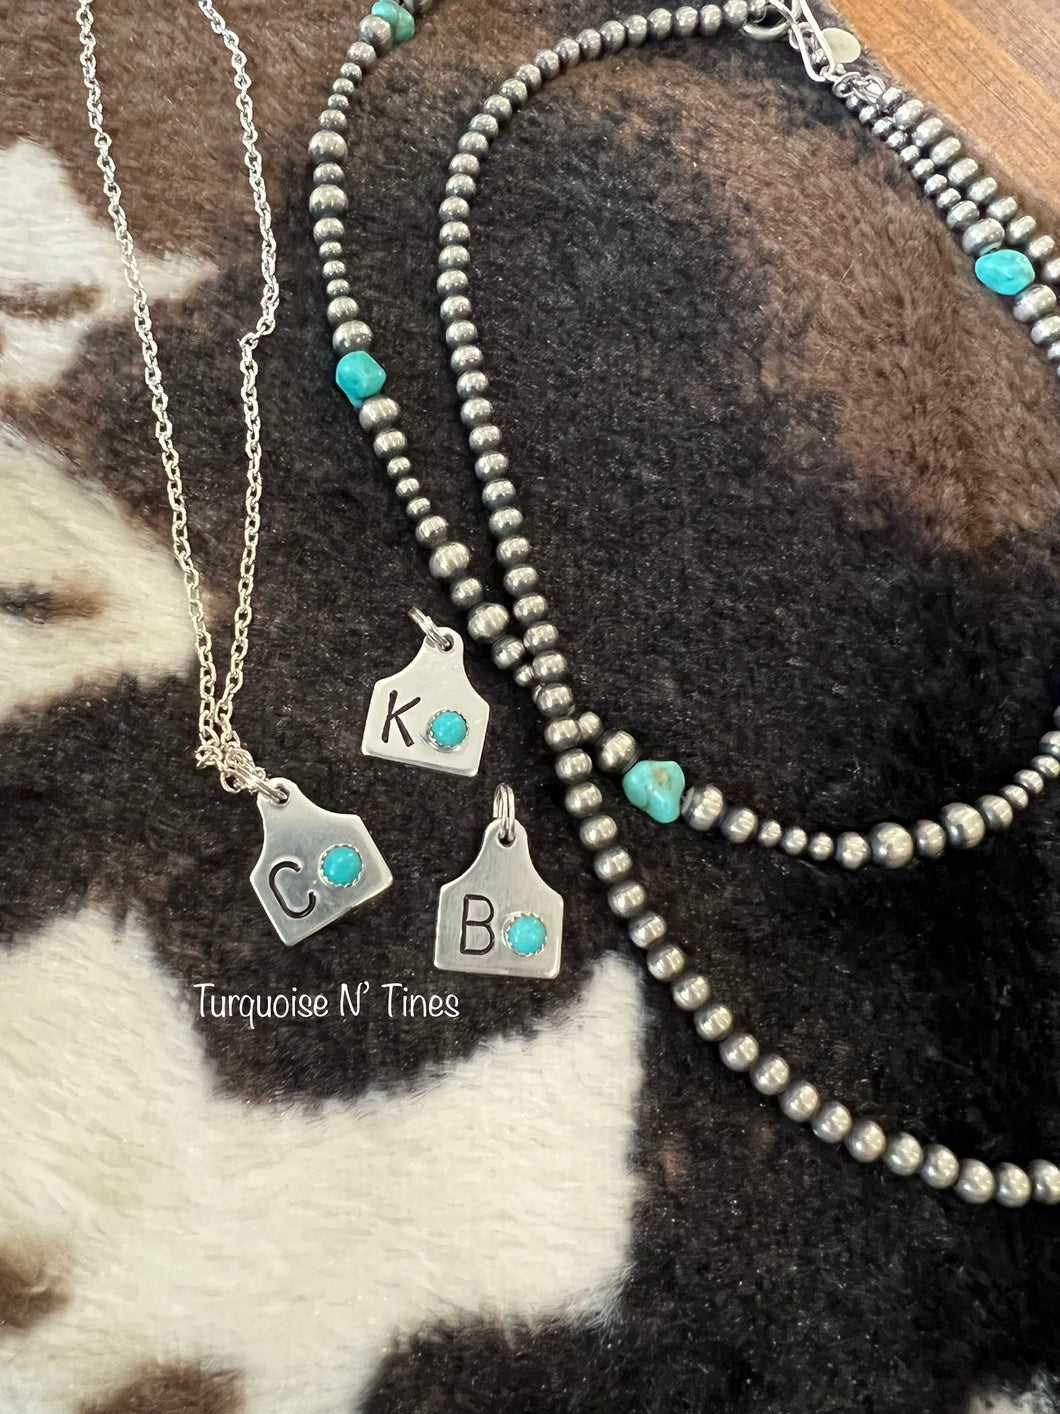 Mini cowtag w/ turquoise necklace